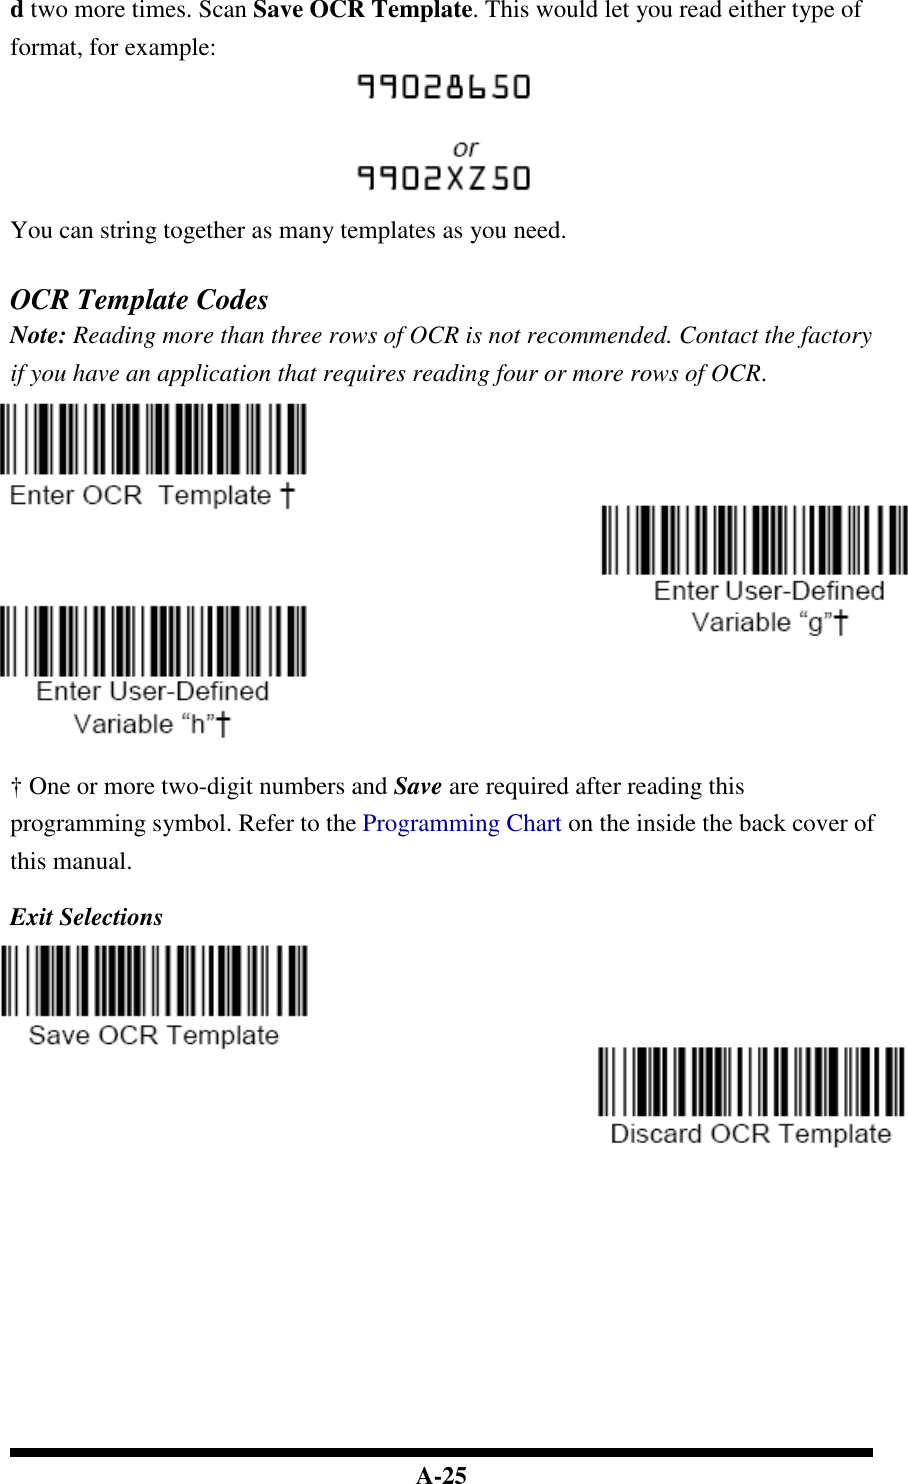  A-25 d two more times. Scan Save OCR Template. This would let you read either type of format, for example:   You can string together as many templates as you need.   OCR Template Codes Note: Reading more than three rows of OCR is not recommended. Contact the factory if you have an application that requires reading four or more rows of OCR.   † One or more two-digit numbers and Save are required after reading this programming symbol. Refer to the Programming Chart on the inside the back cover of this manual.  Exit Selections                 